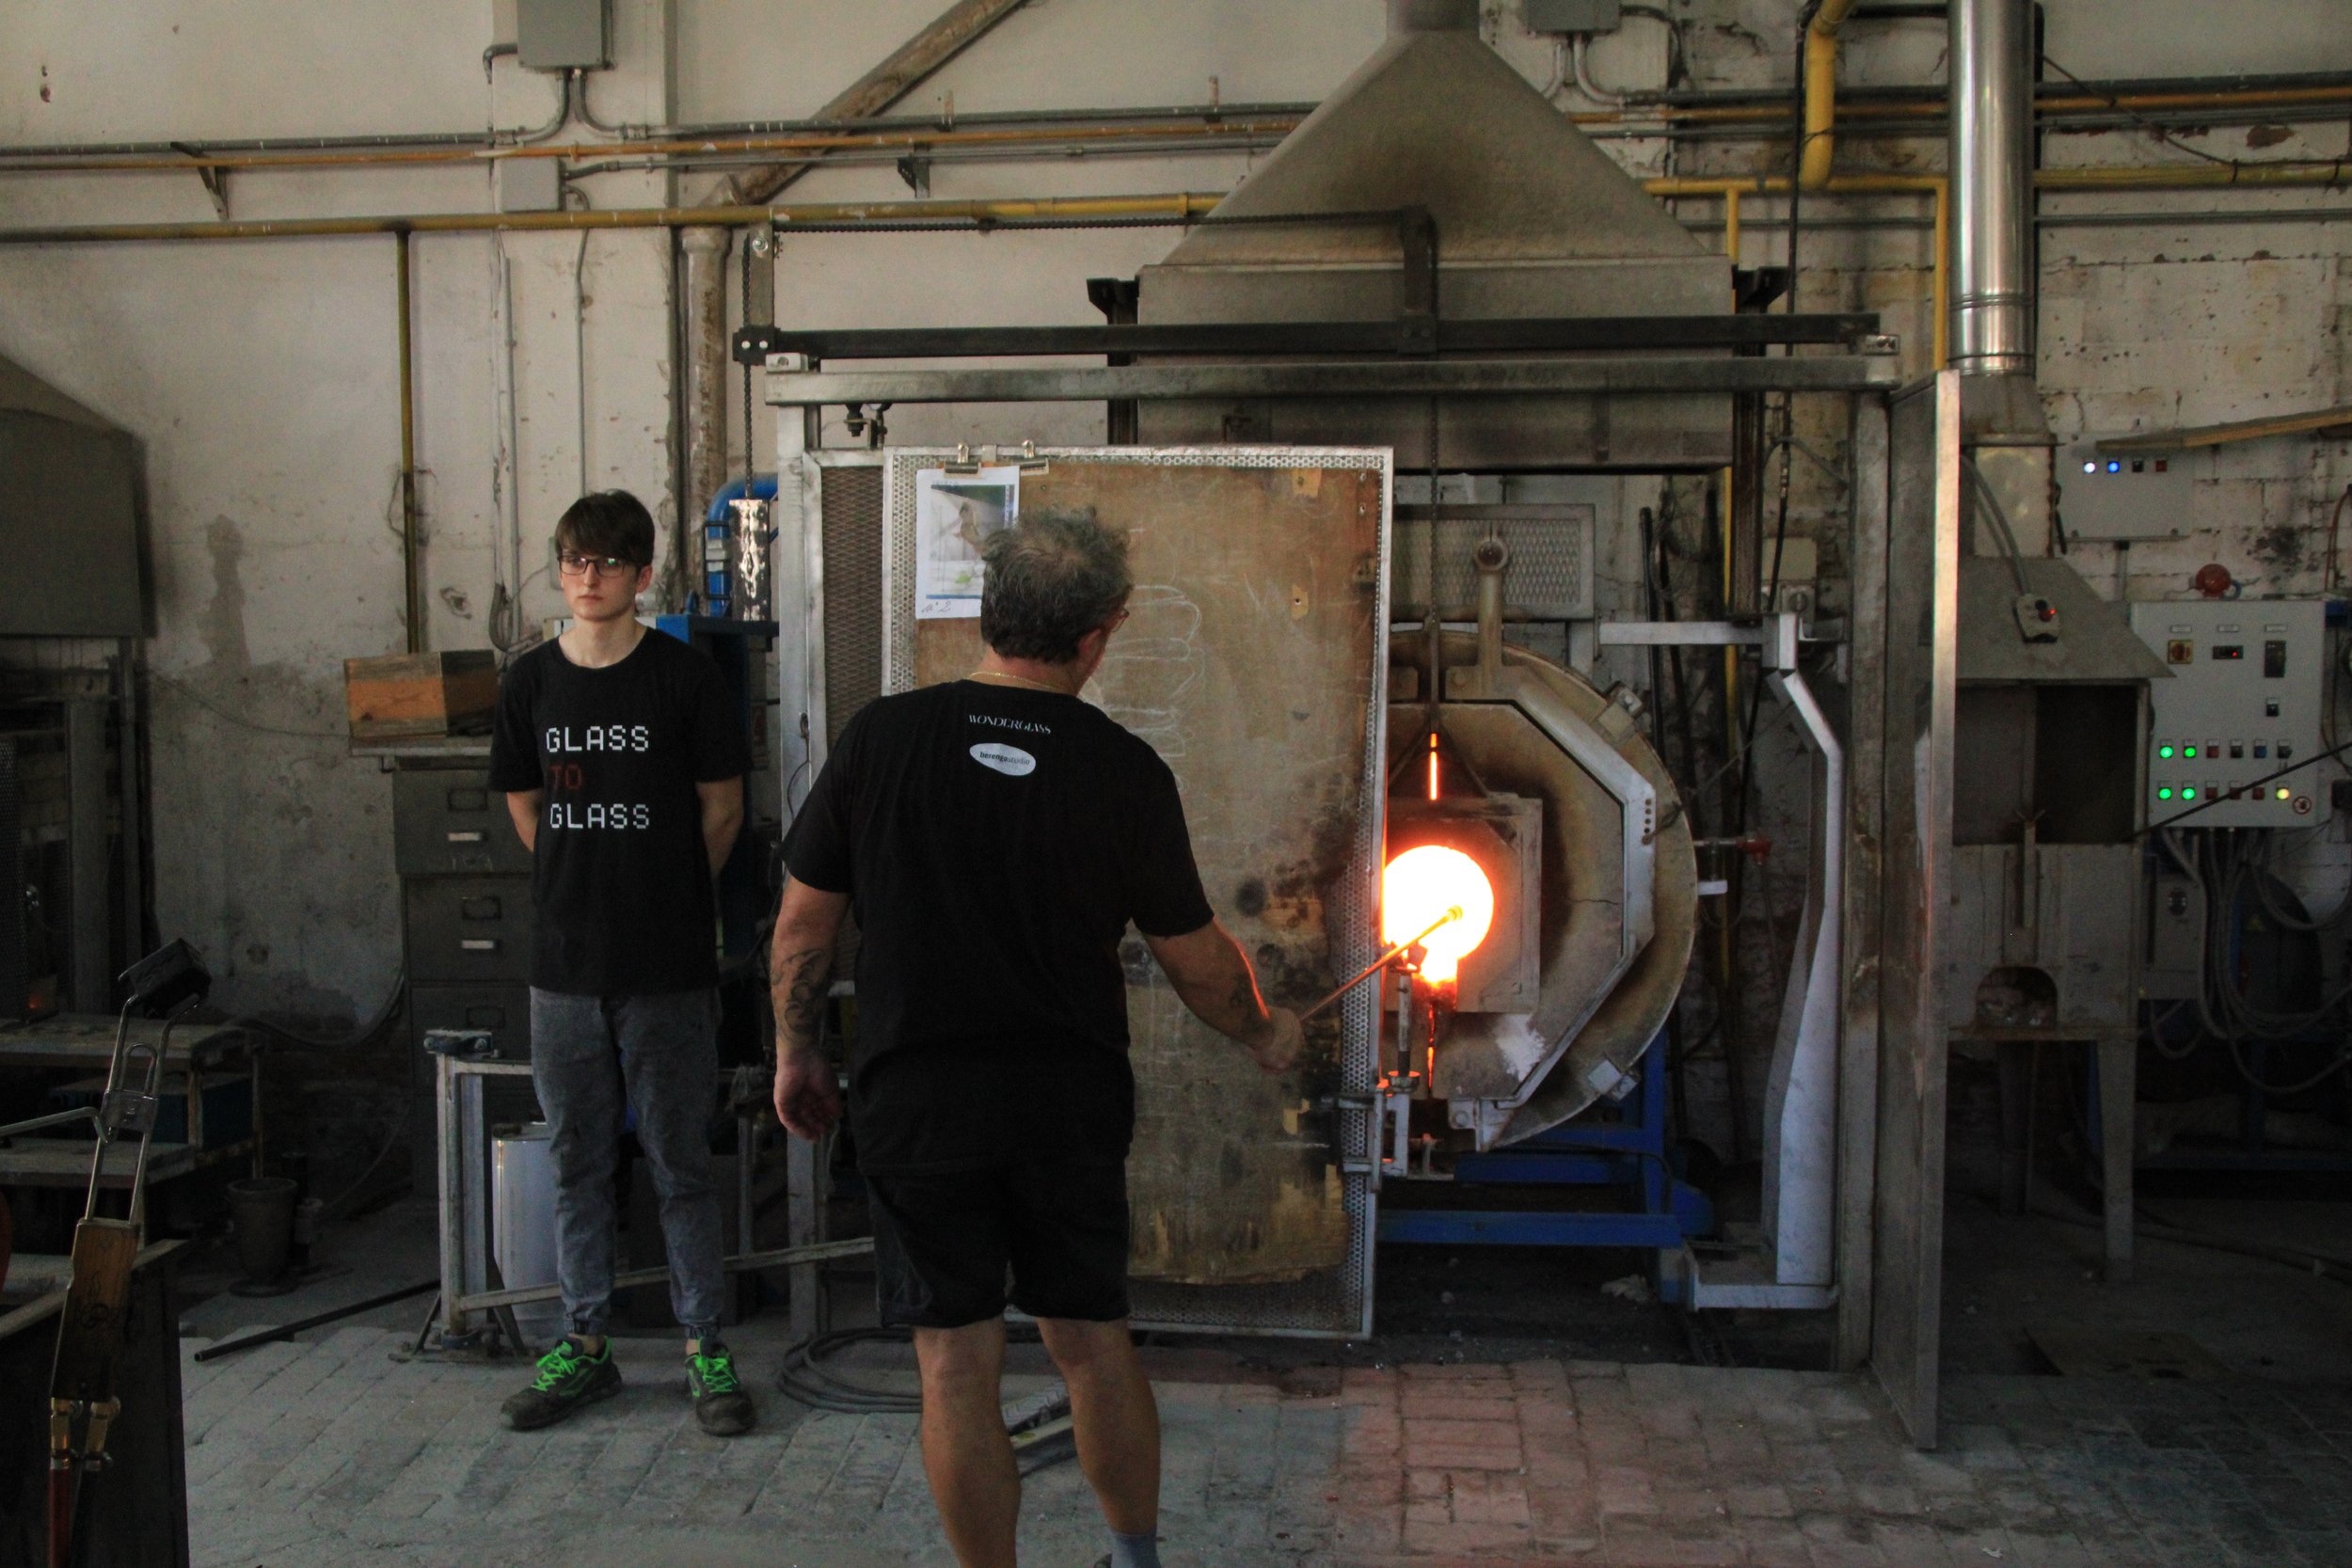 Venetian Murano Glass Studios and Their Blazing Ovens Survived COVID Only to Face European Energy Crisis